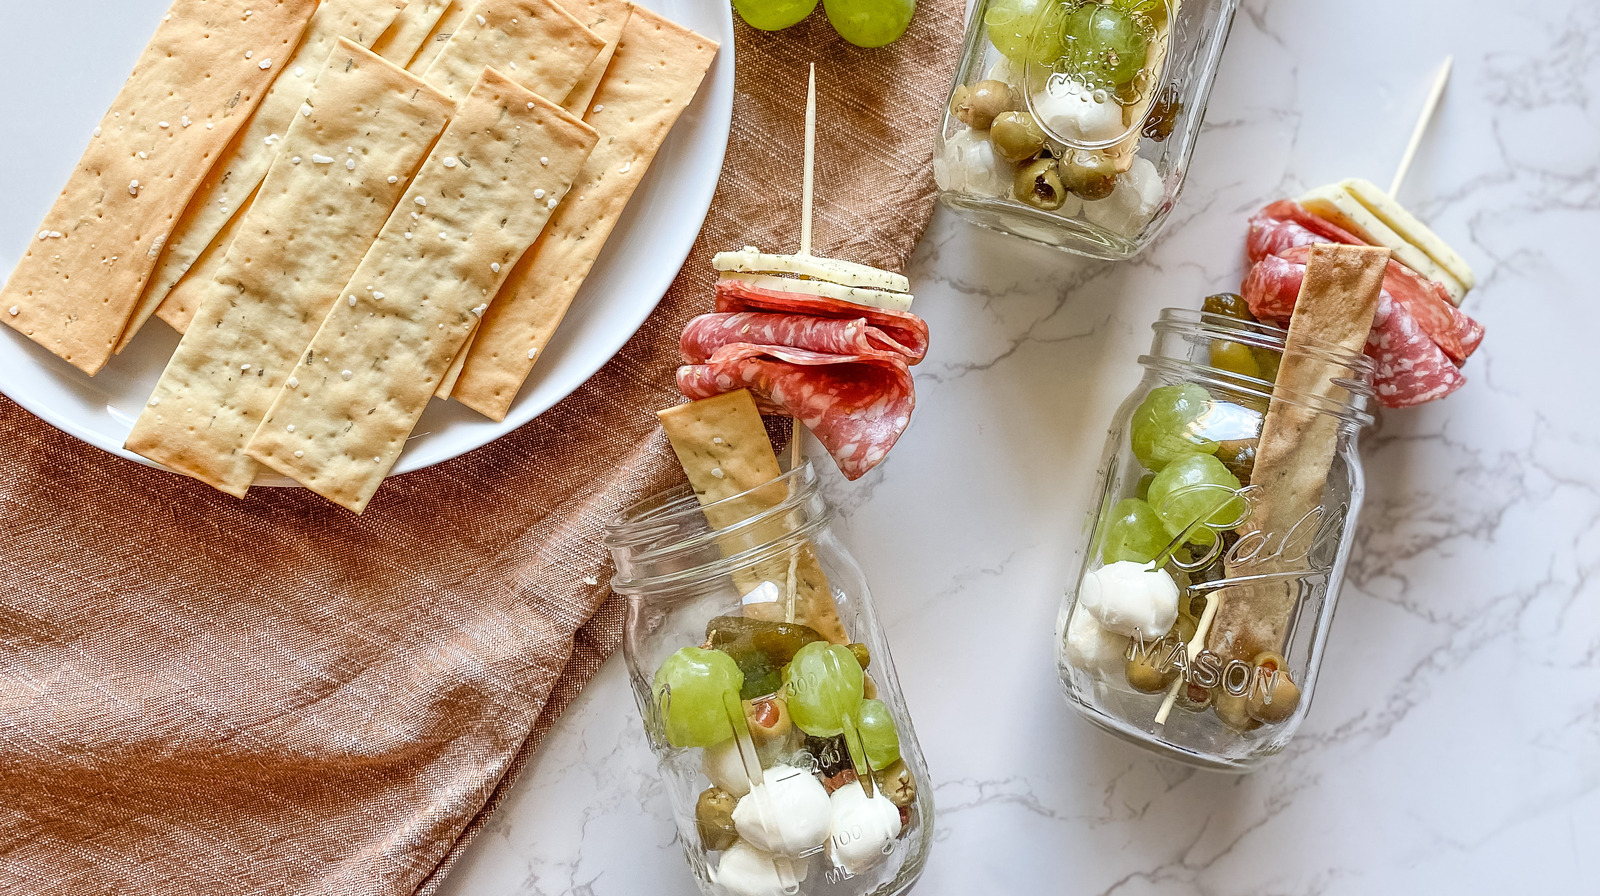 Jarcuterie' Gives You Your Own Personal Charcuterie Board for Easy